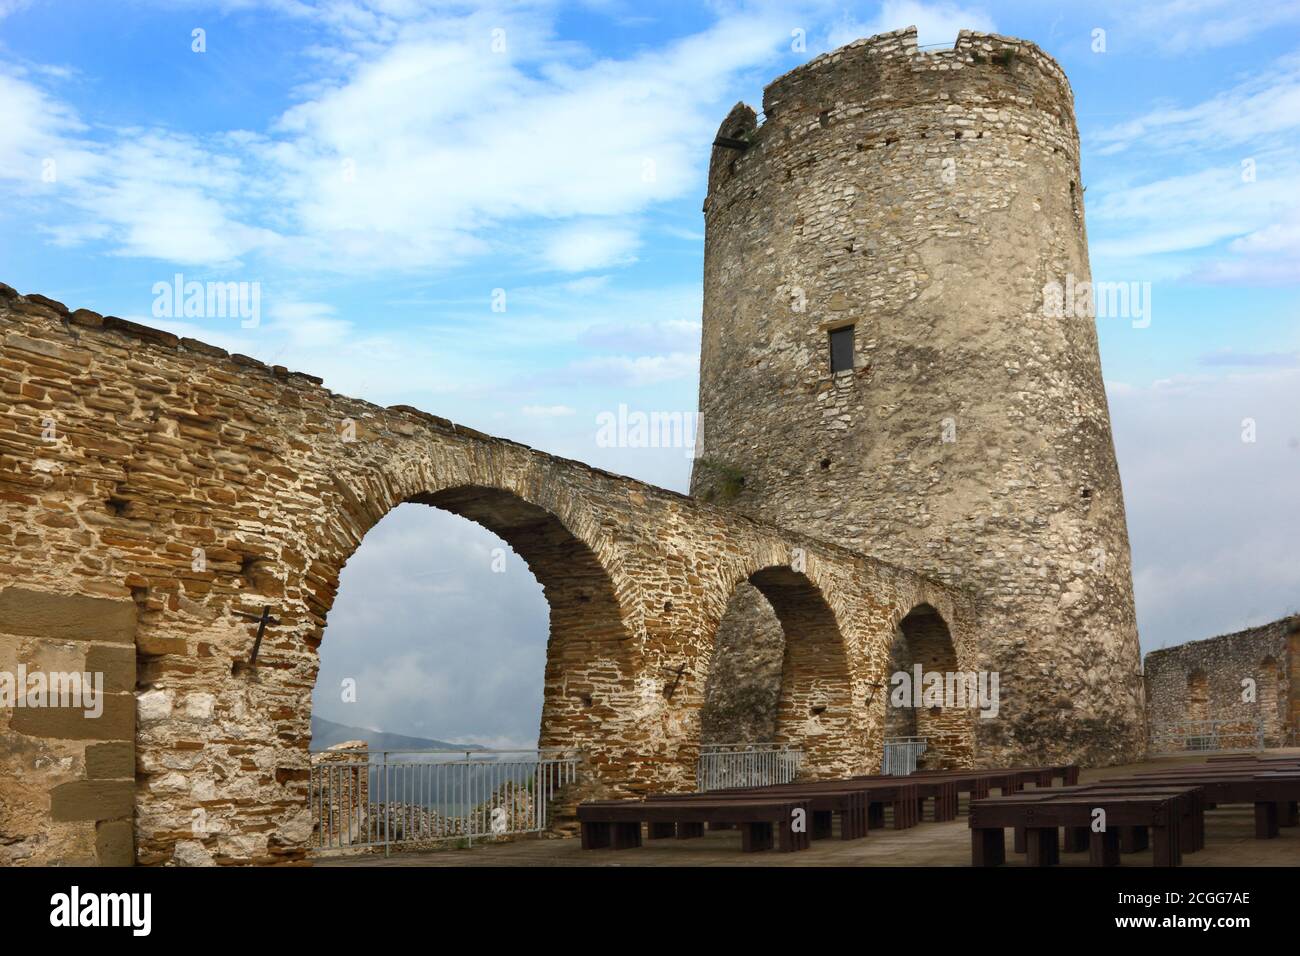 The ruins with tower of Spis castle, Slovakia Stock Photo